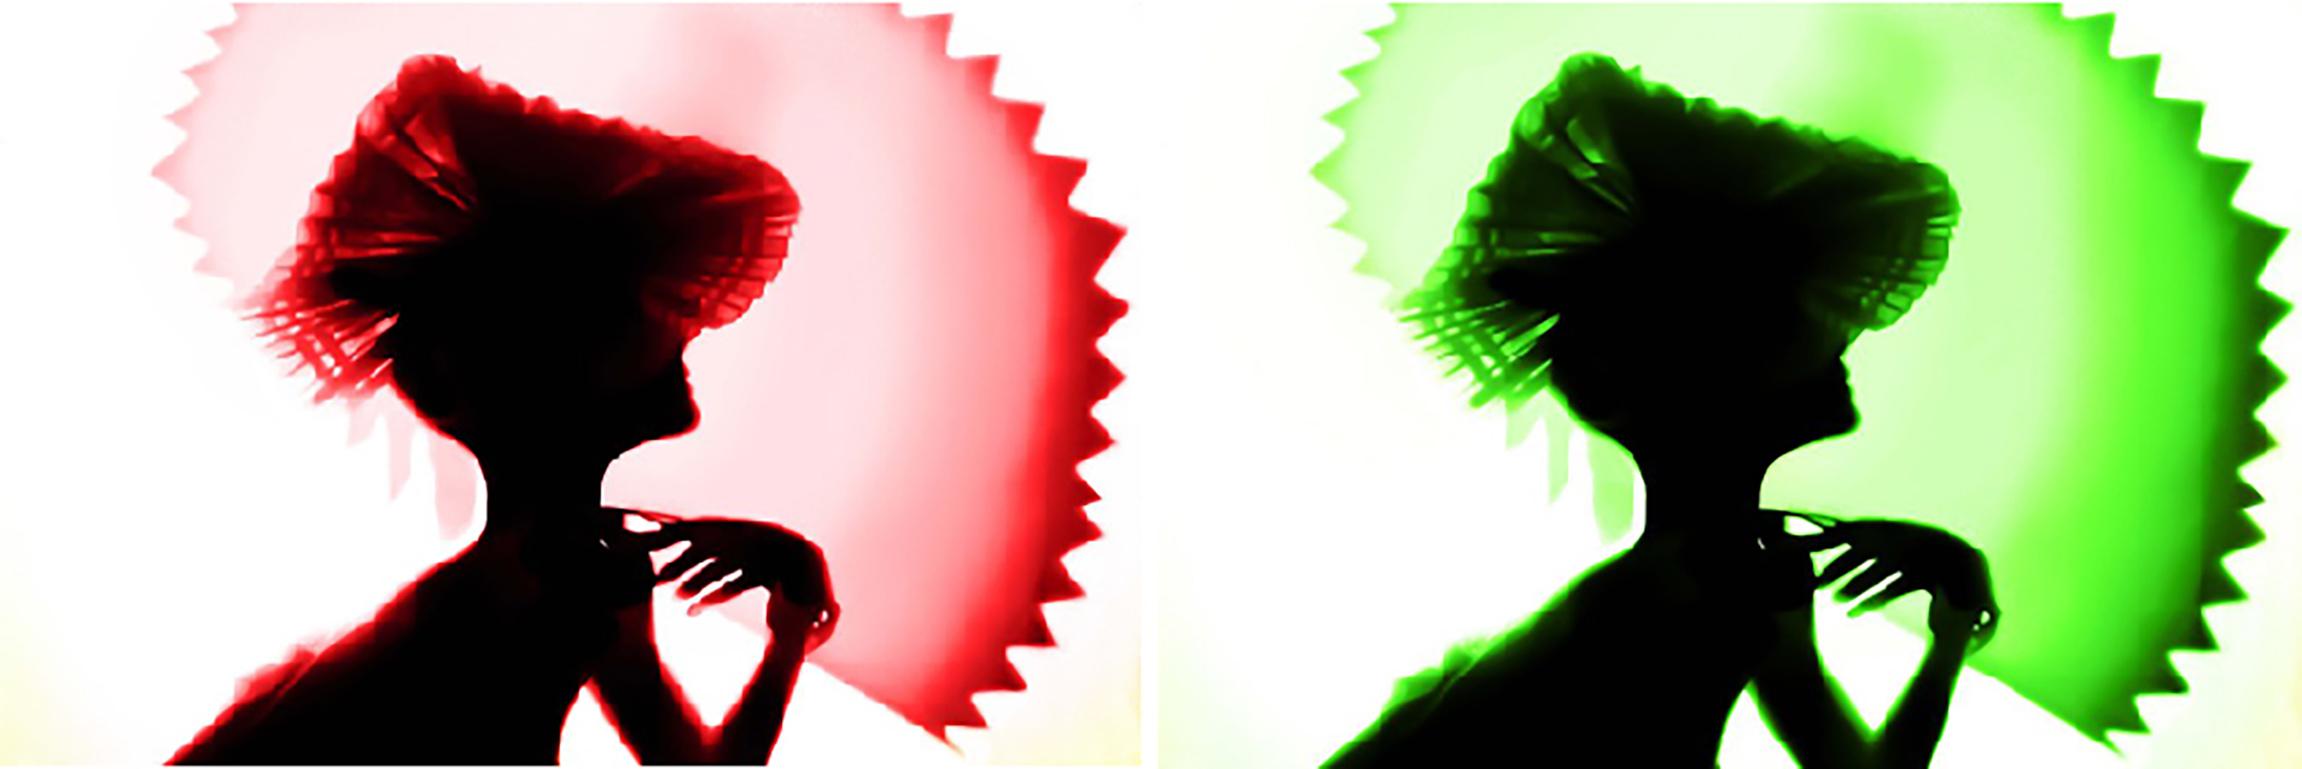 Dora Franco Abstract Photograph - Back Lighting, Red Green Diptych.